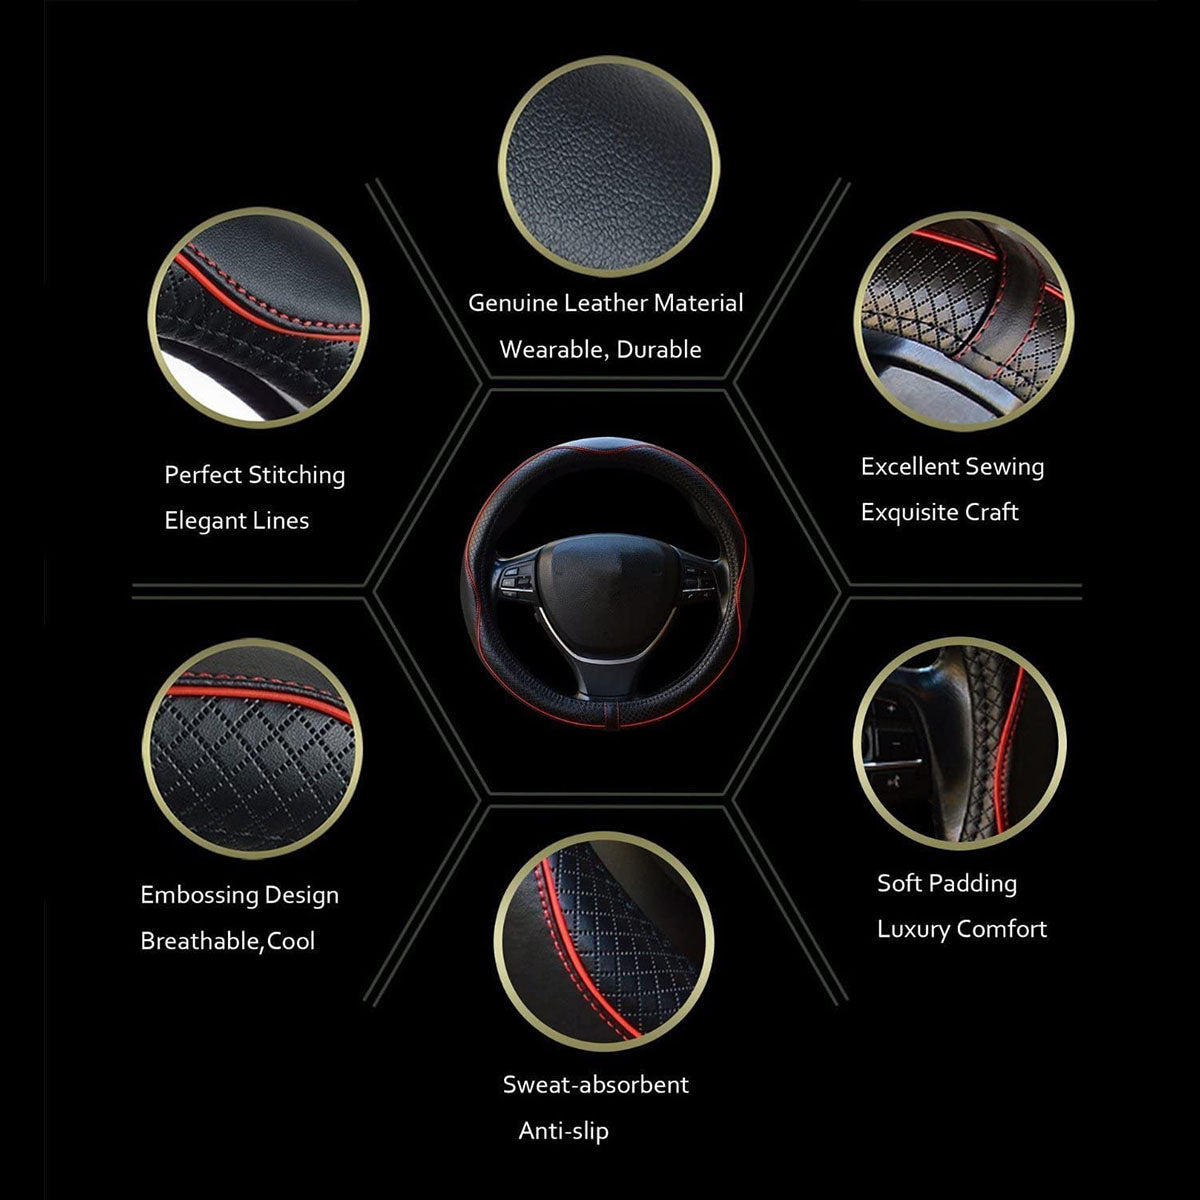 Car Steering Wheel Cover, Custom For Your Cars, Anti-Slip, Safety, Soft, Breathable, Heavy Duty, Thick, Full Surround, Sports Style, Car Accessories MC18990